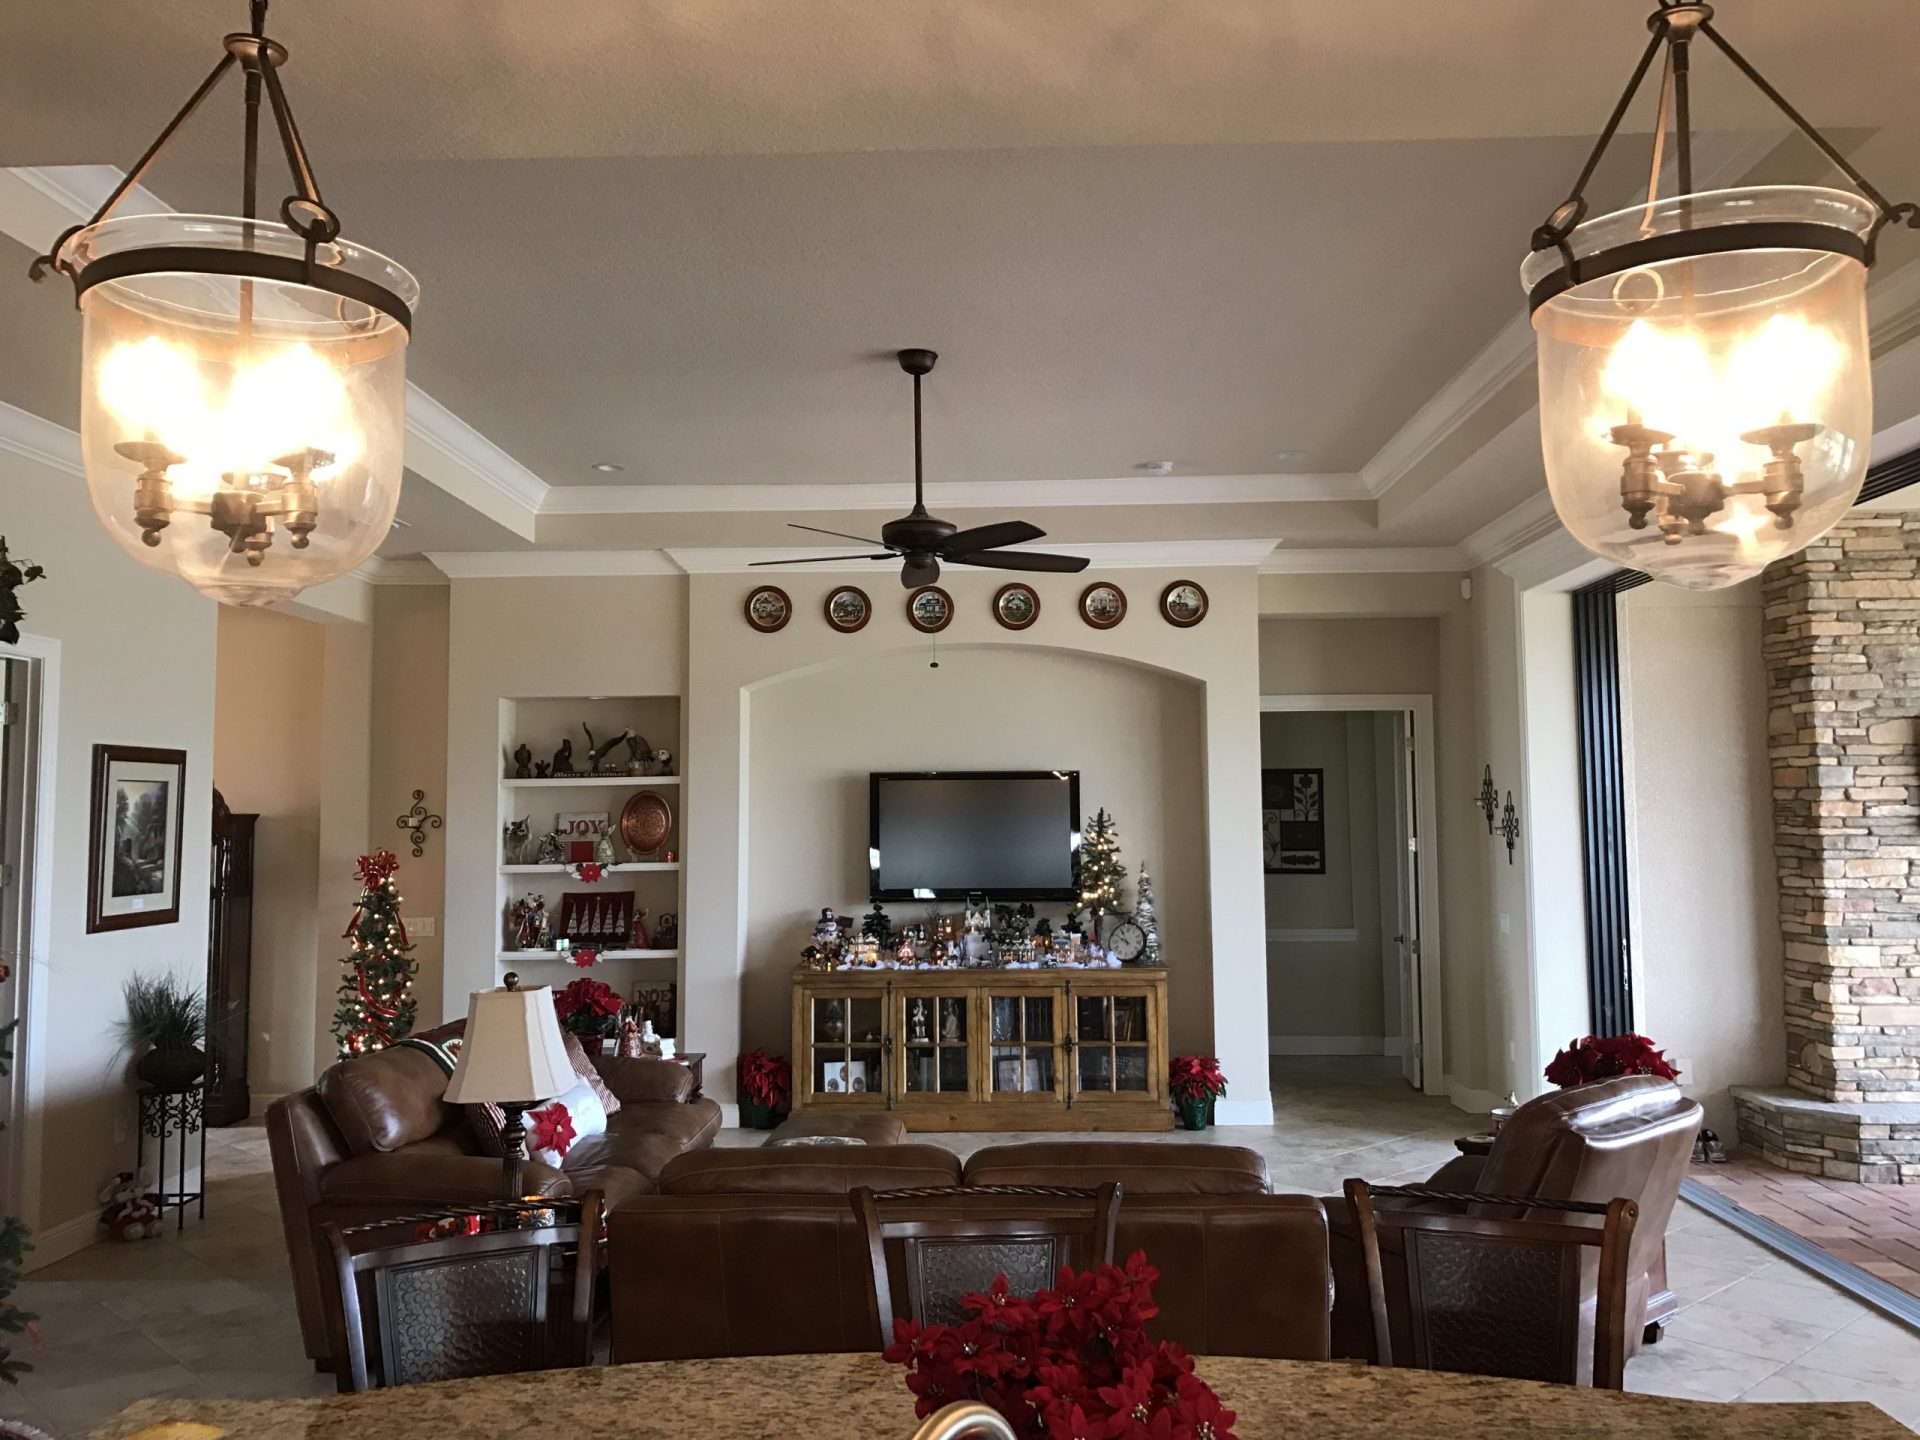 Join the celebration as the Steube family welcomes the holidays in their beautiful new home, crafted by Lee Wetherington Homes.